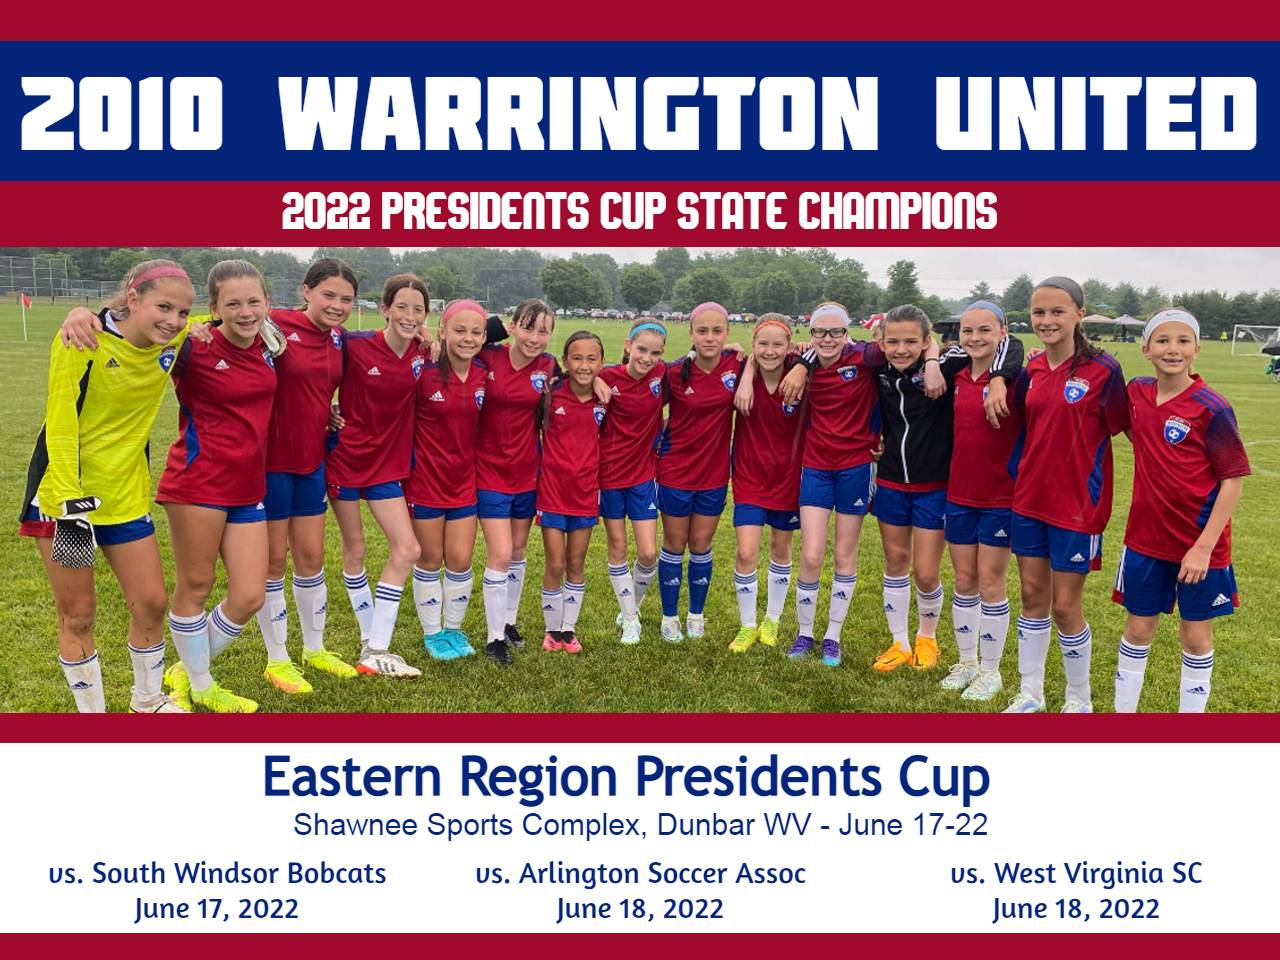 Congratulations to the 2010 Girls United on winning the EPYSA Presidents Cup and going on to Regionals in West Virginia!